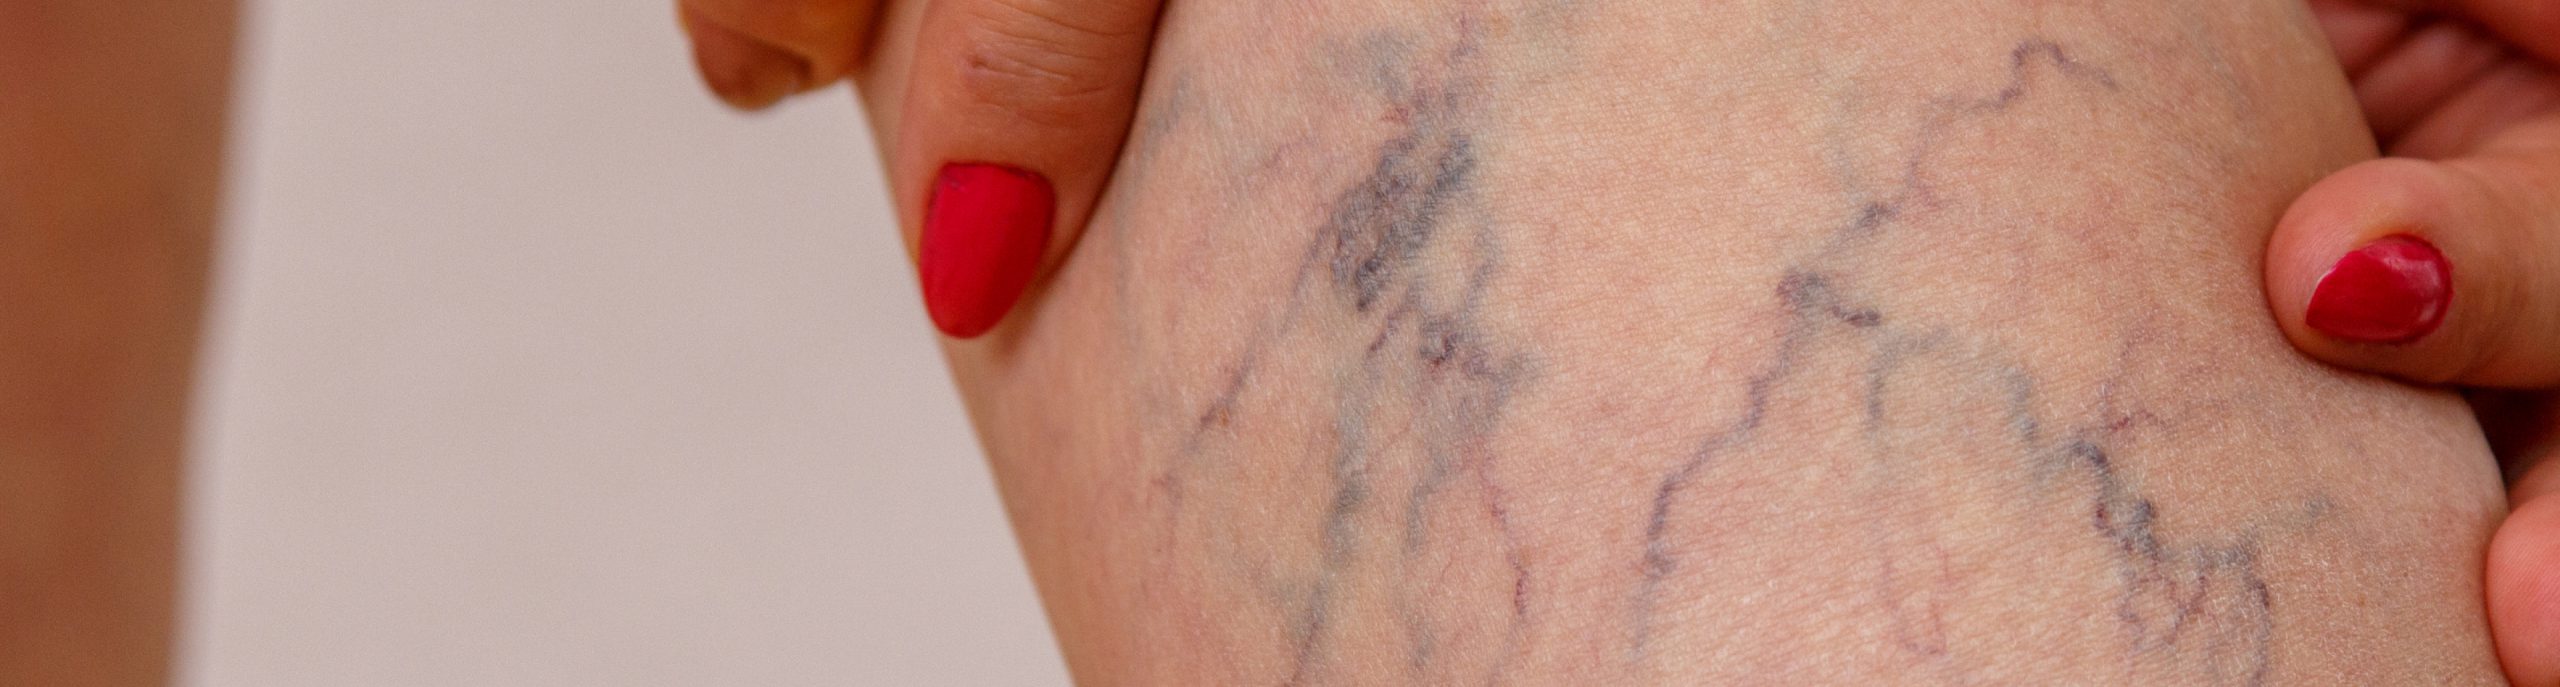 Spider and varicose vein treatments at Essential Aesthetics